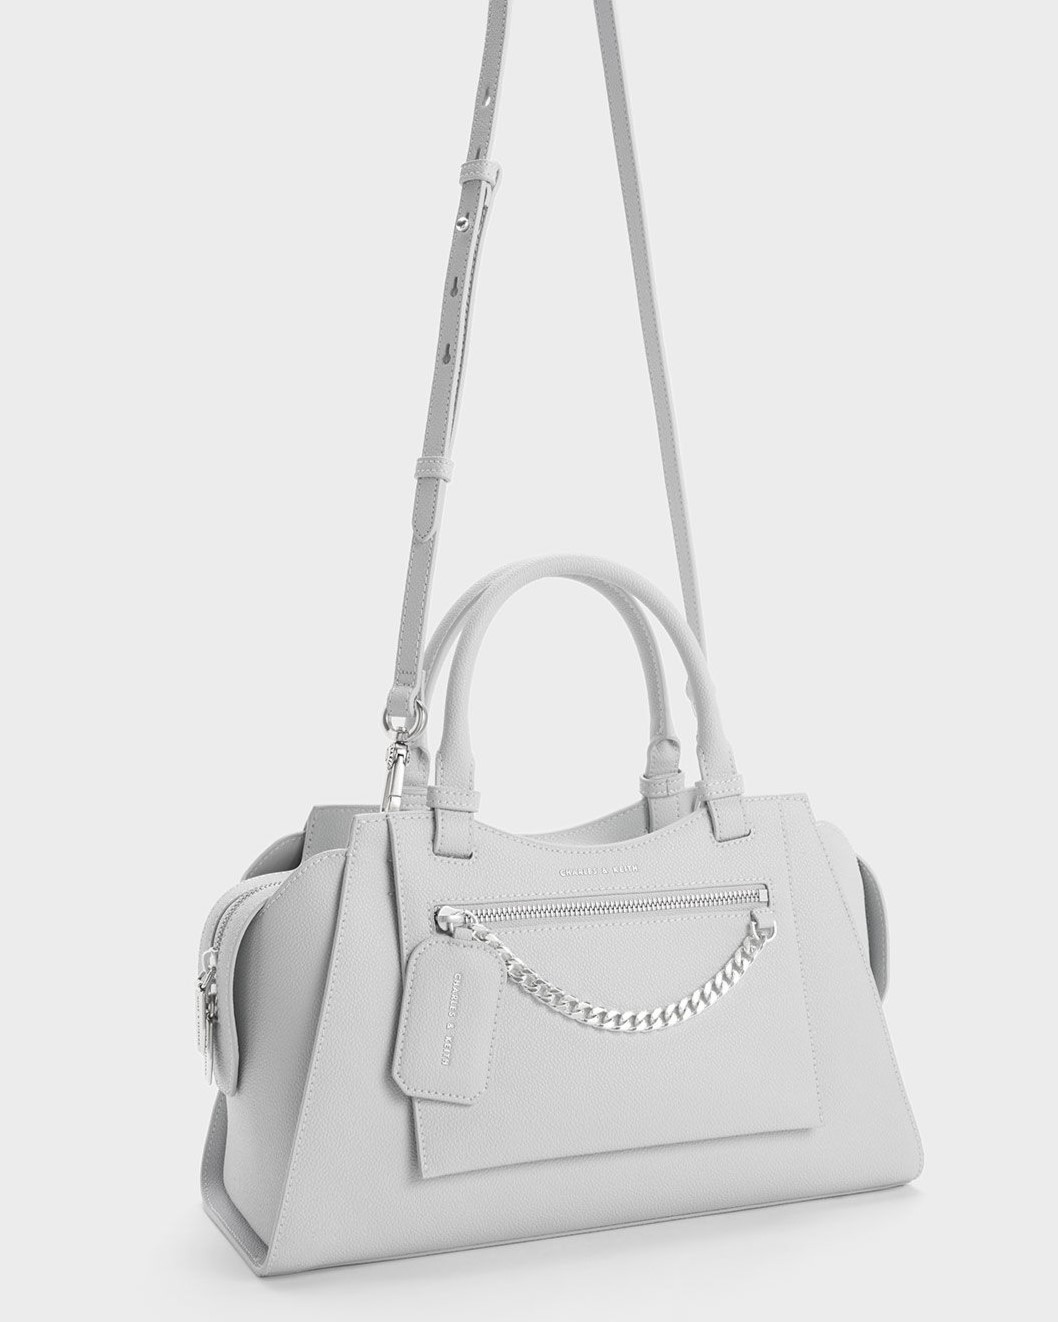 TÚI XÁCH CHARLES AND KEITH AVIS TRAPEZE TOTE BAG CK2-30671492 14